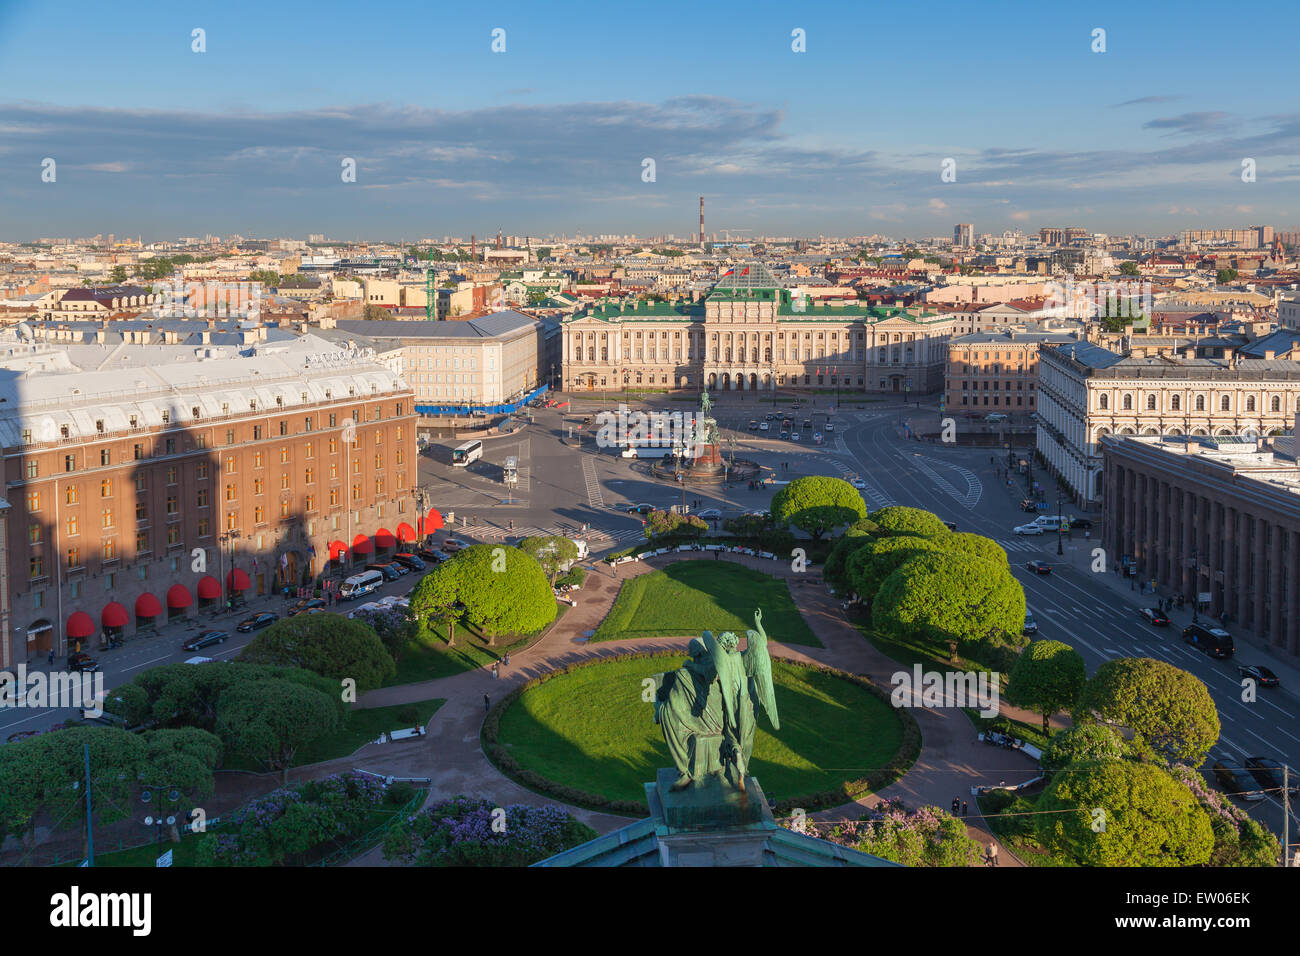 View of St. Isaac's Square and the area, Astoria from the colonnade of St. Isaac's Cathedral Stock Photo